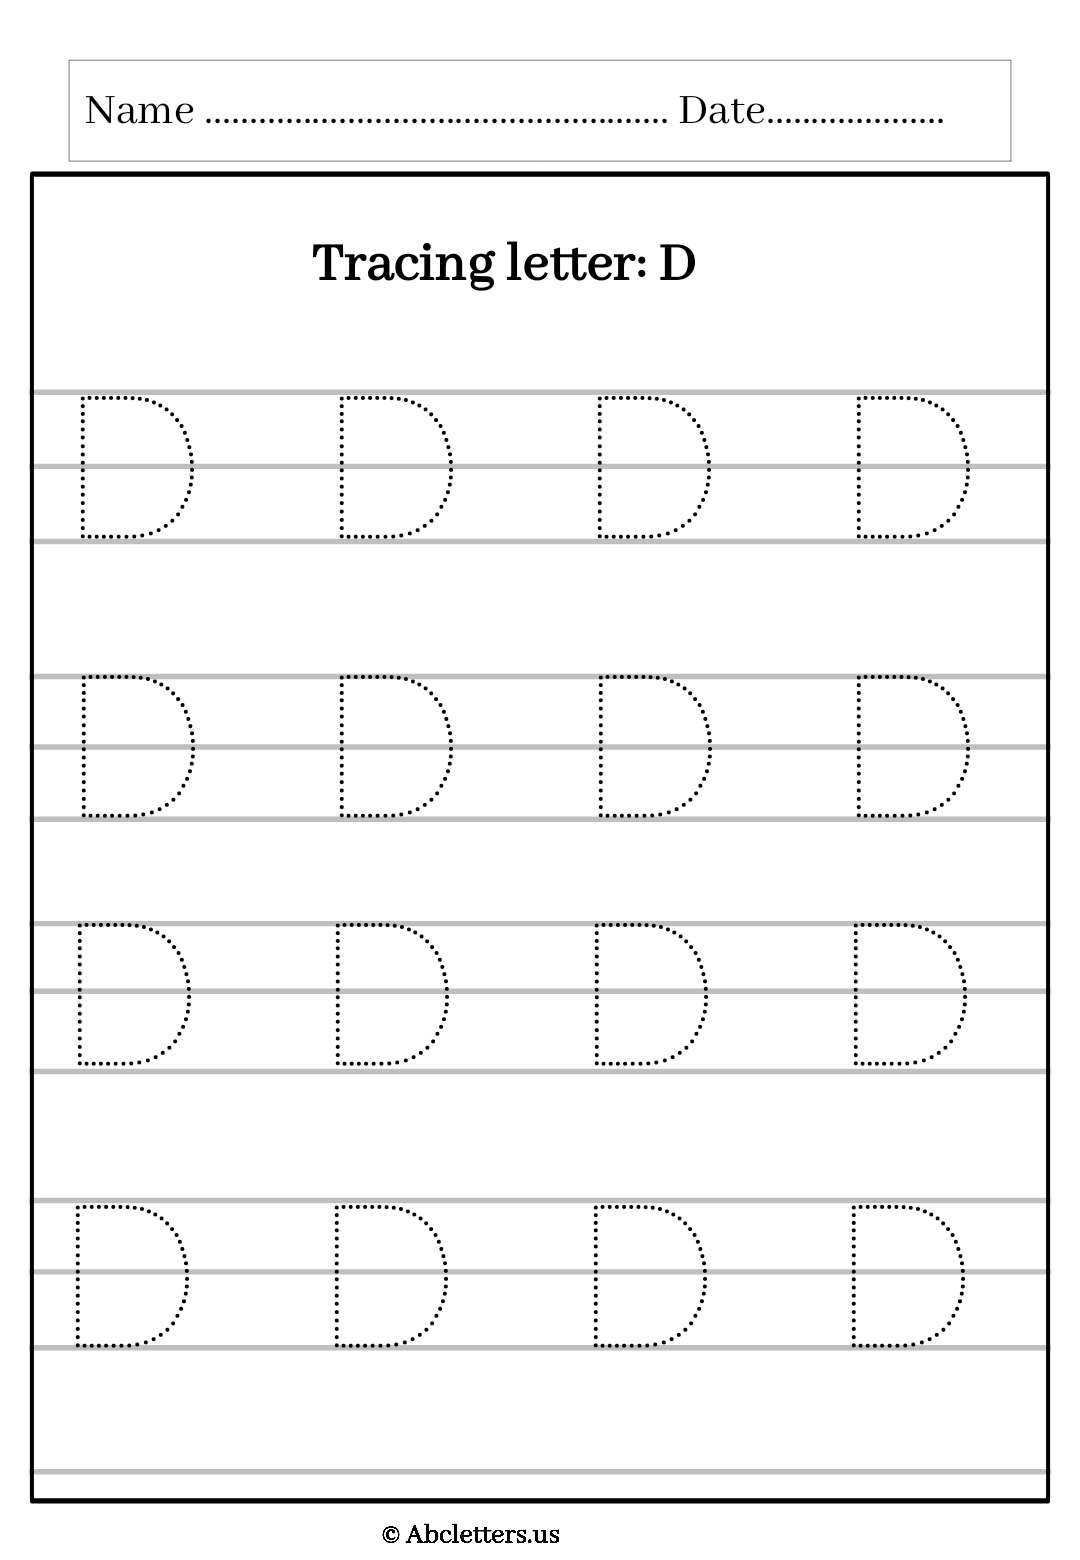 Tracing letter uppercase D with 3 line